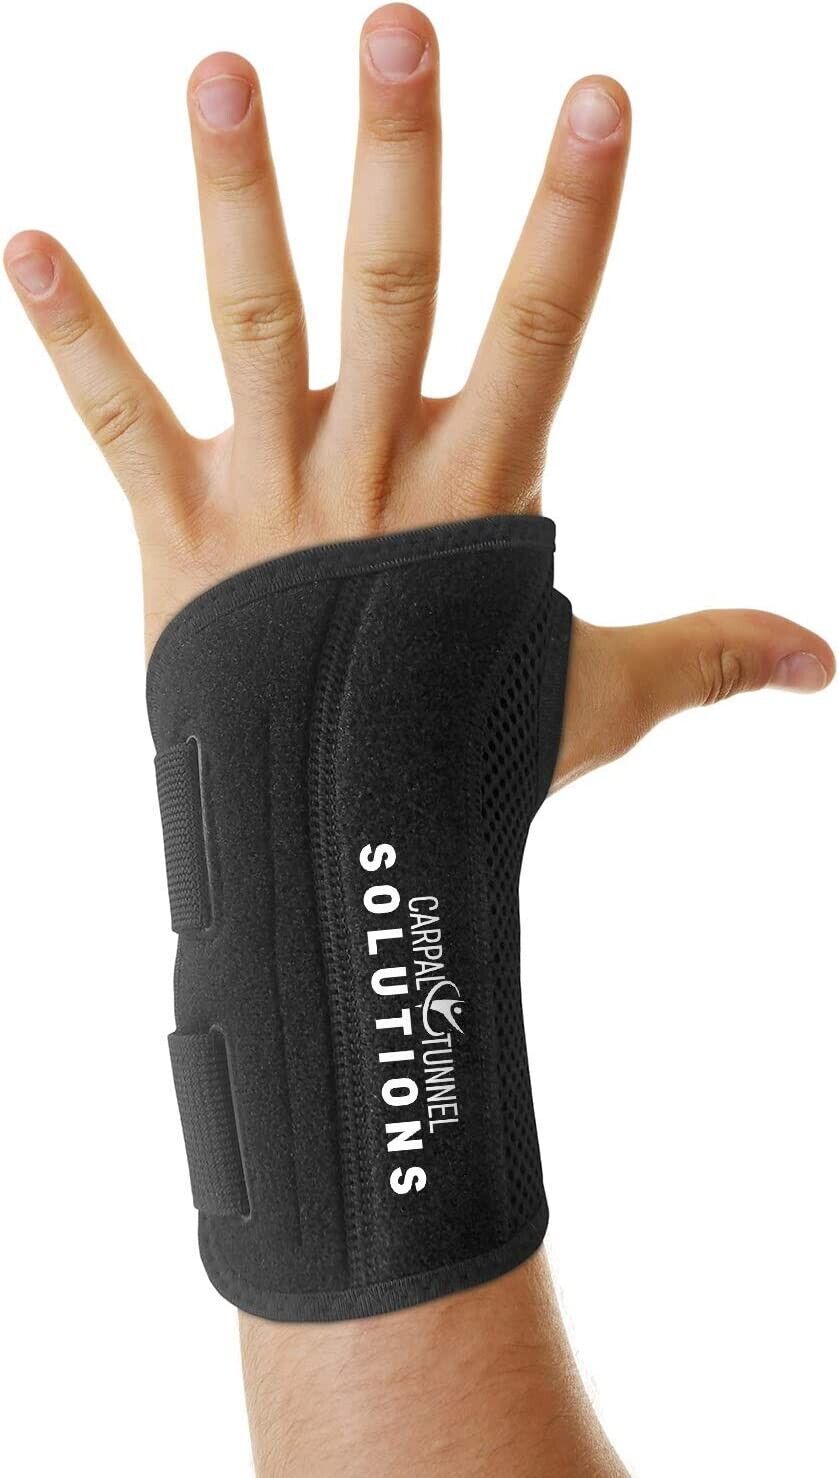 Wrist Hand Support Daytime Wearing Brace for Carpal Tunnel - Size S/M Left Hand - Opticdeals